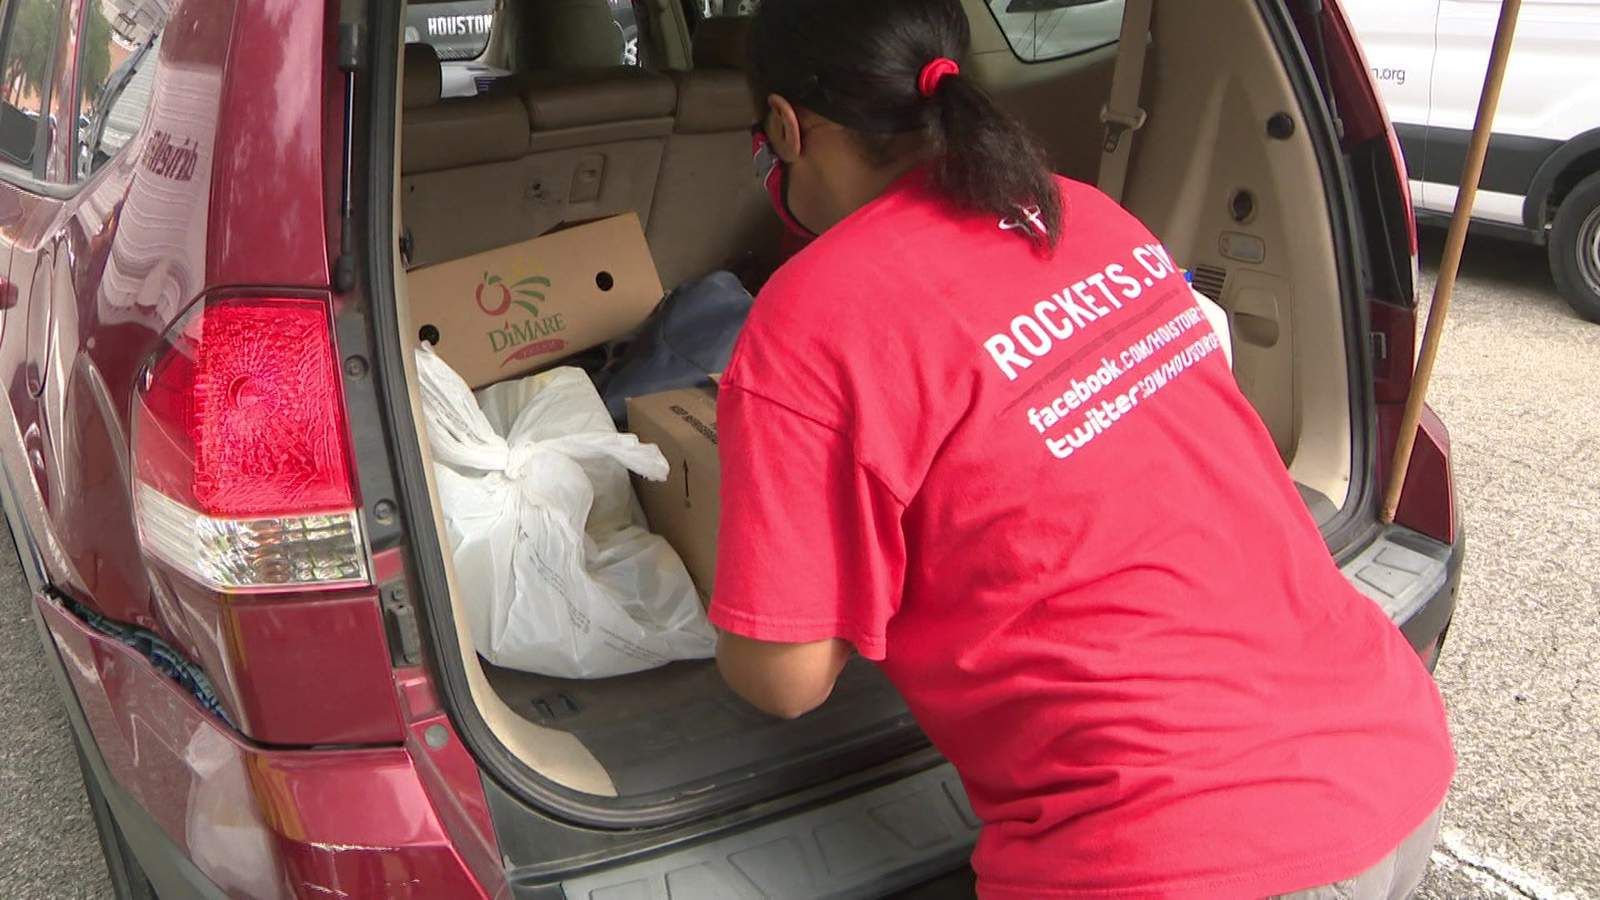 28,000 meals distributed as part of Rockets, Second Servings food distribution event